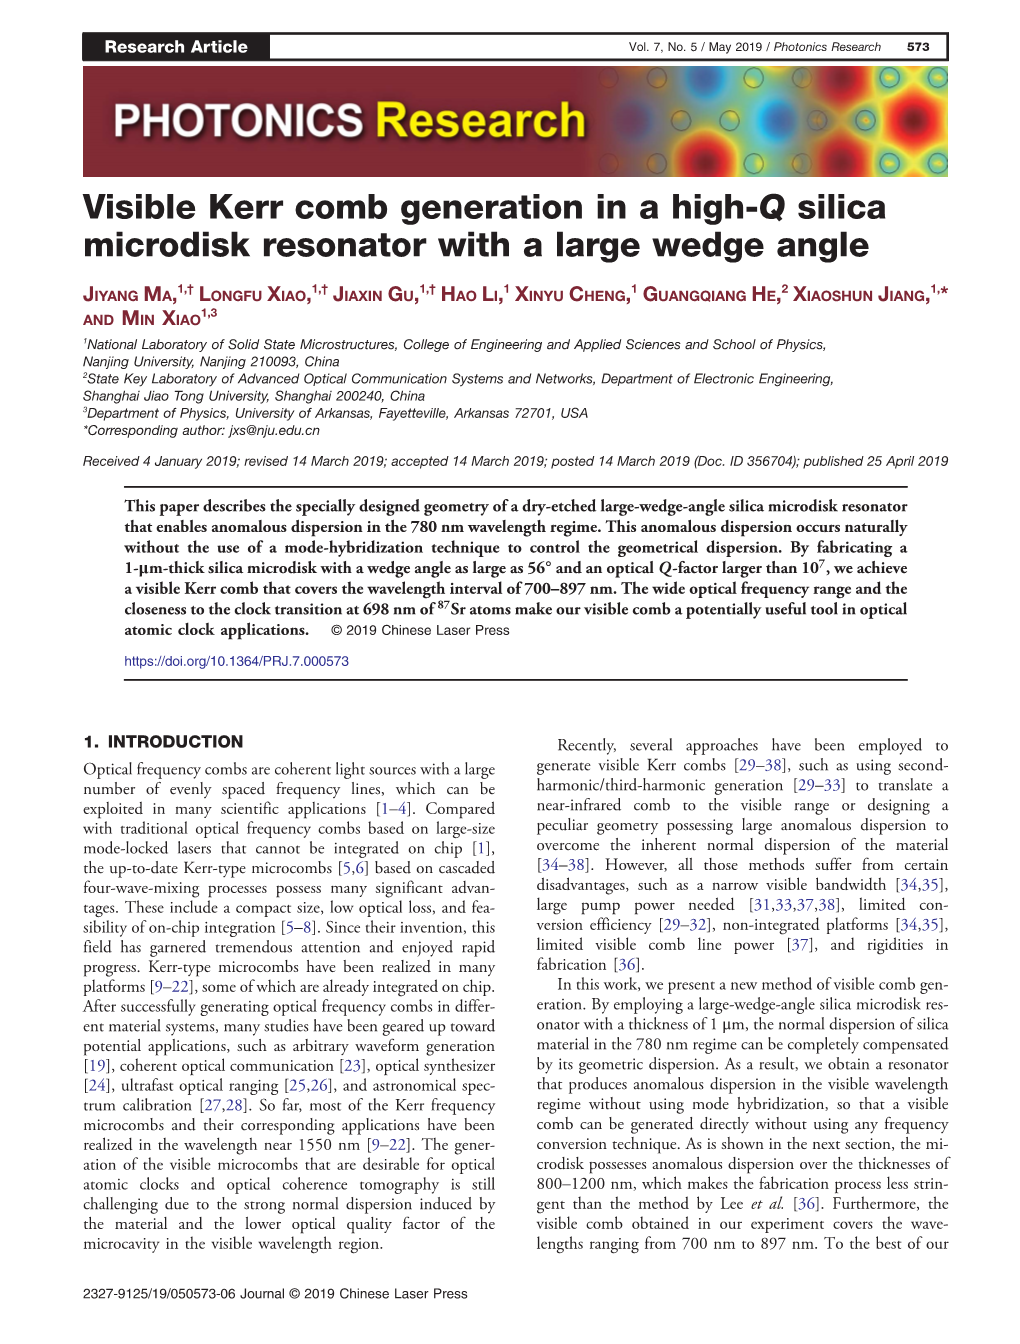 Visible Kerr Comb Generation in a High-Q Silica Microdisk Resonator with a Large Wedge Angle